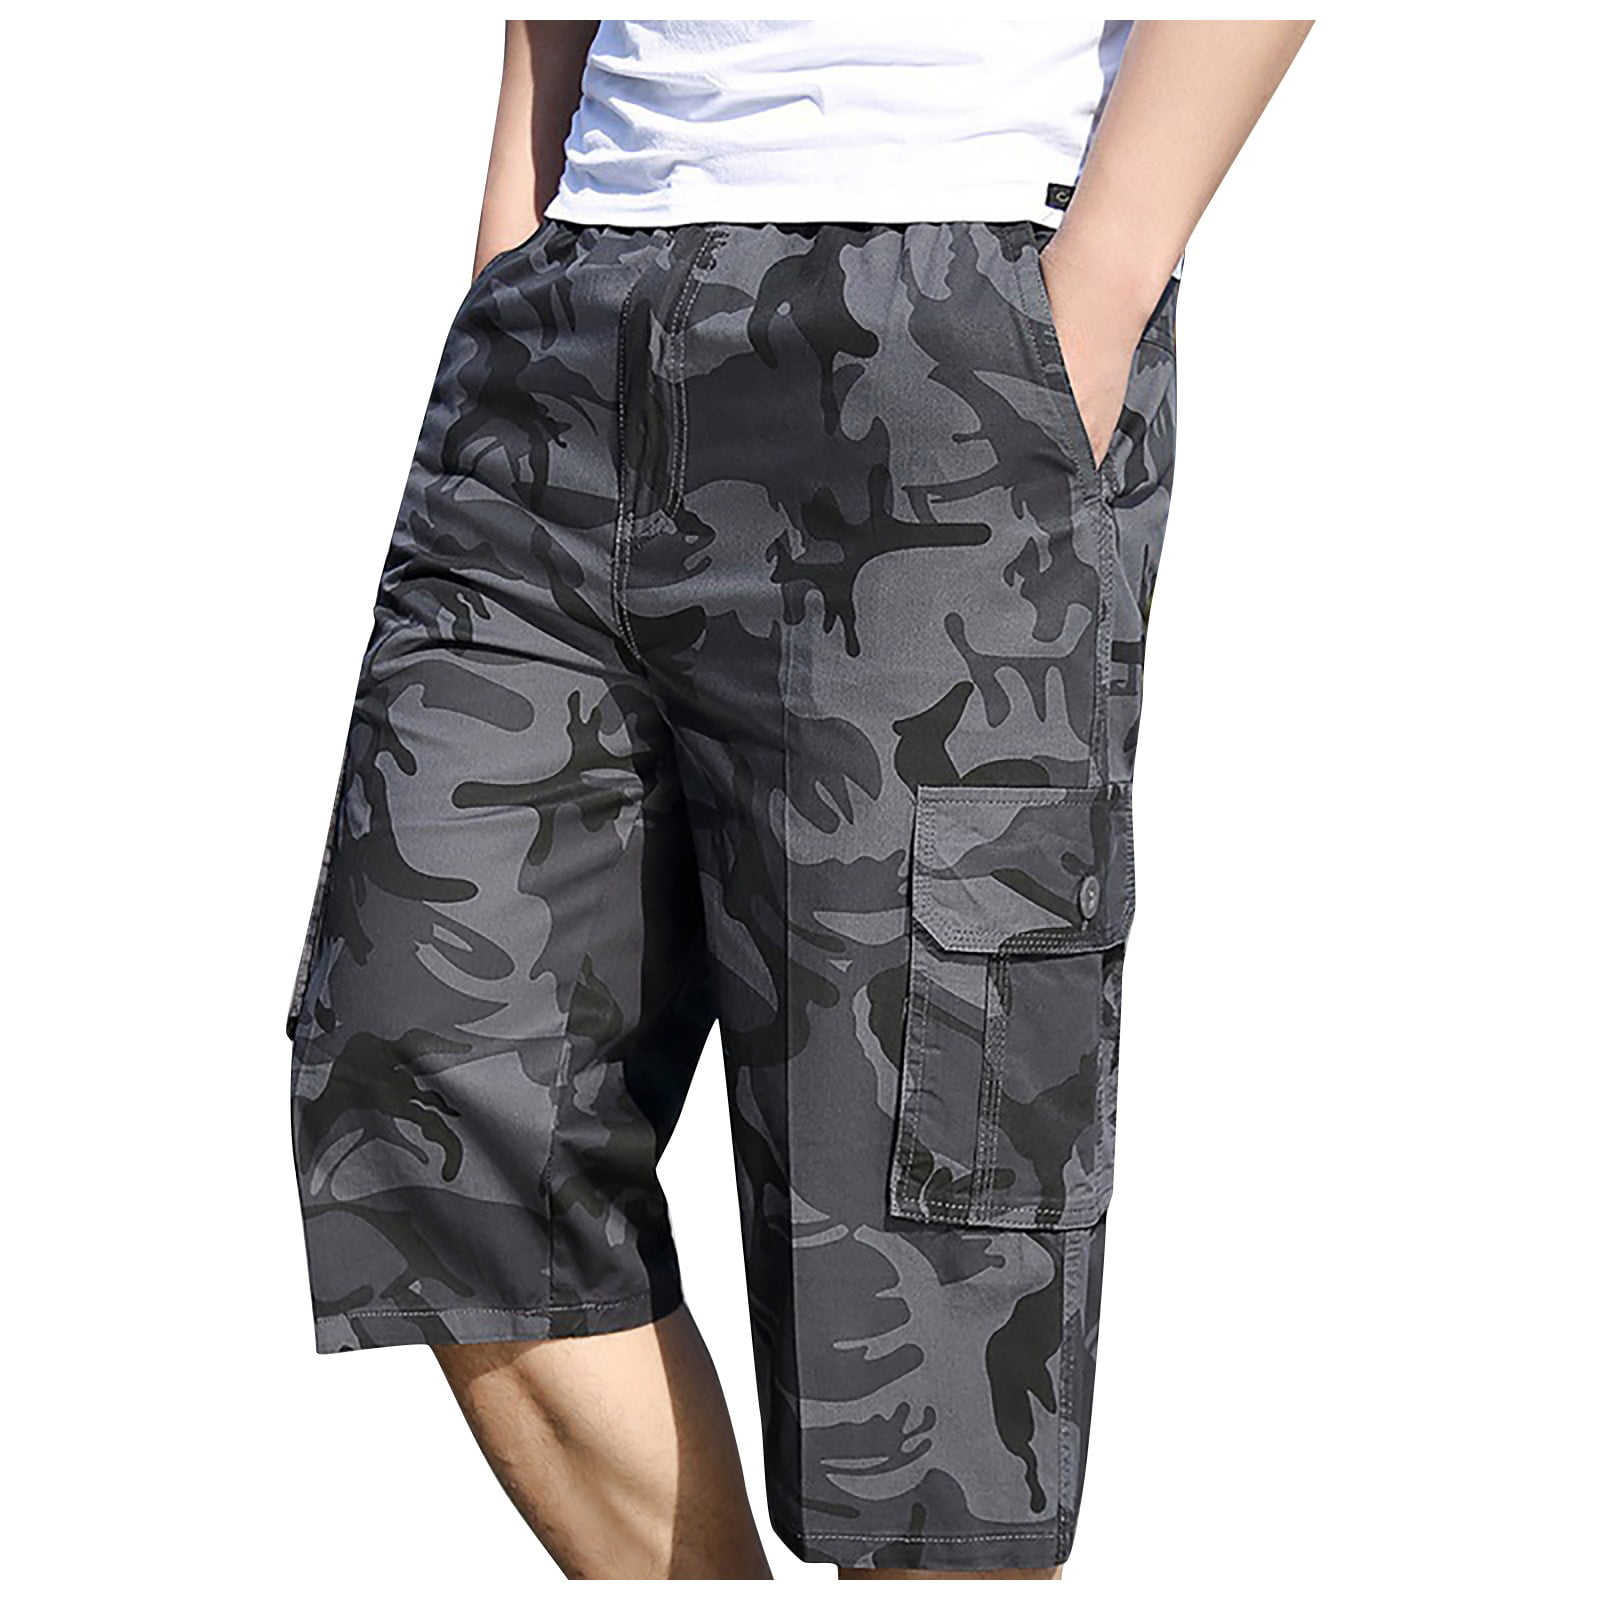 APEXFWDT Cargo Shorts for Men Big and Tall Camo Outdoor Military Tactical  Cargo Short Elastic Waist Multi-Pocket Camouflage Shorts 